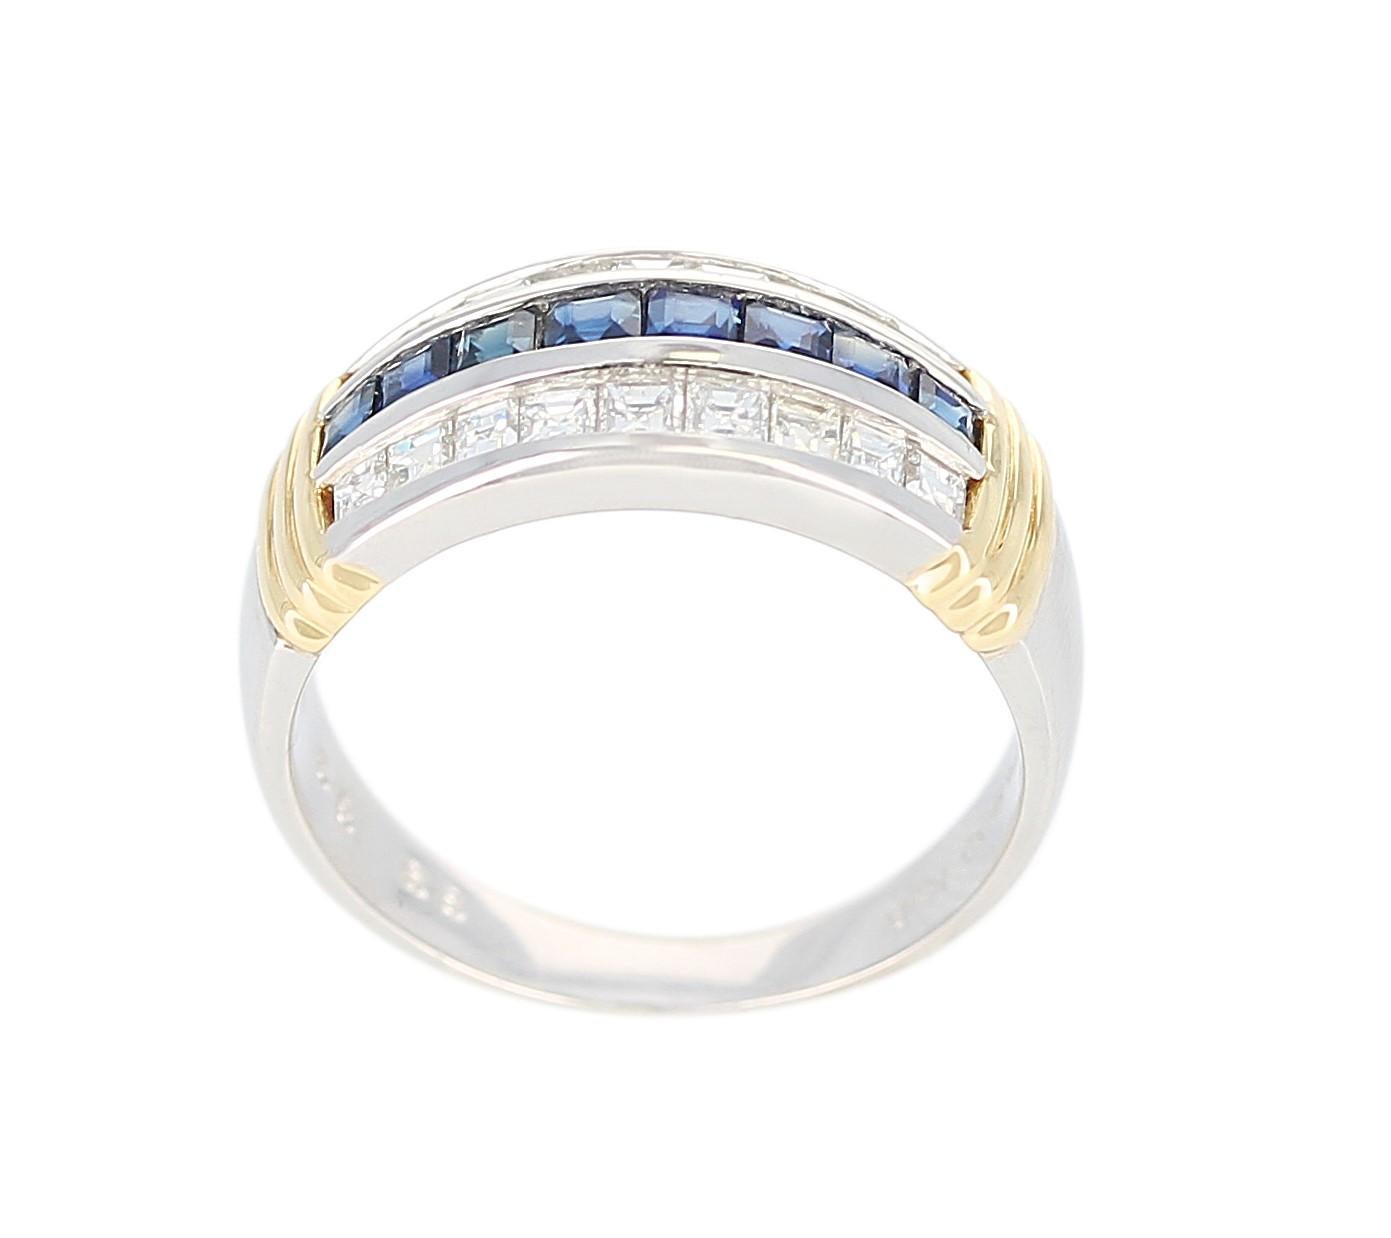 A Channel Set Sapphire and Diamond Band with One Row of Sapphires between Two Rows of Diamonds, with Two 18K Yellow Gold Linings, made in Platinum. Sapphire Weight: 0.58 carats, Diamond Weight: 0.58 carats, Total Weight: 6.24 grams, Ring Size US